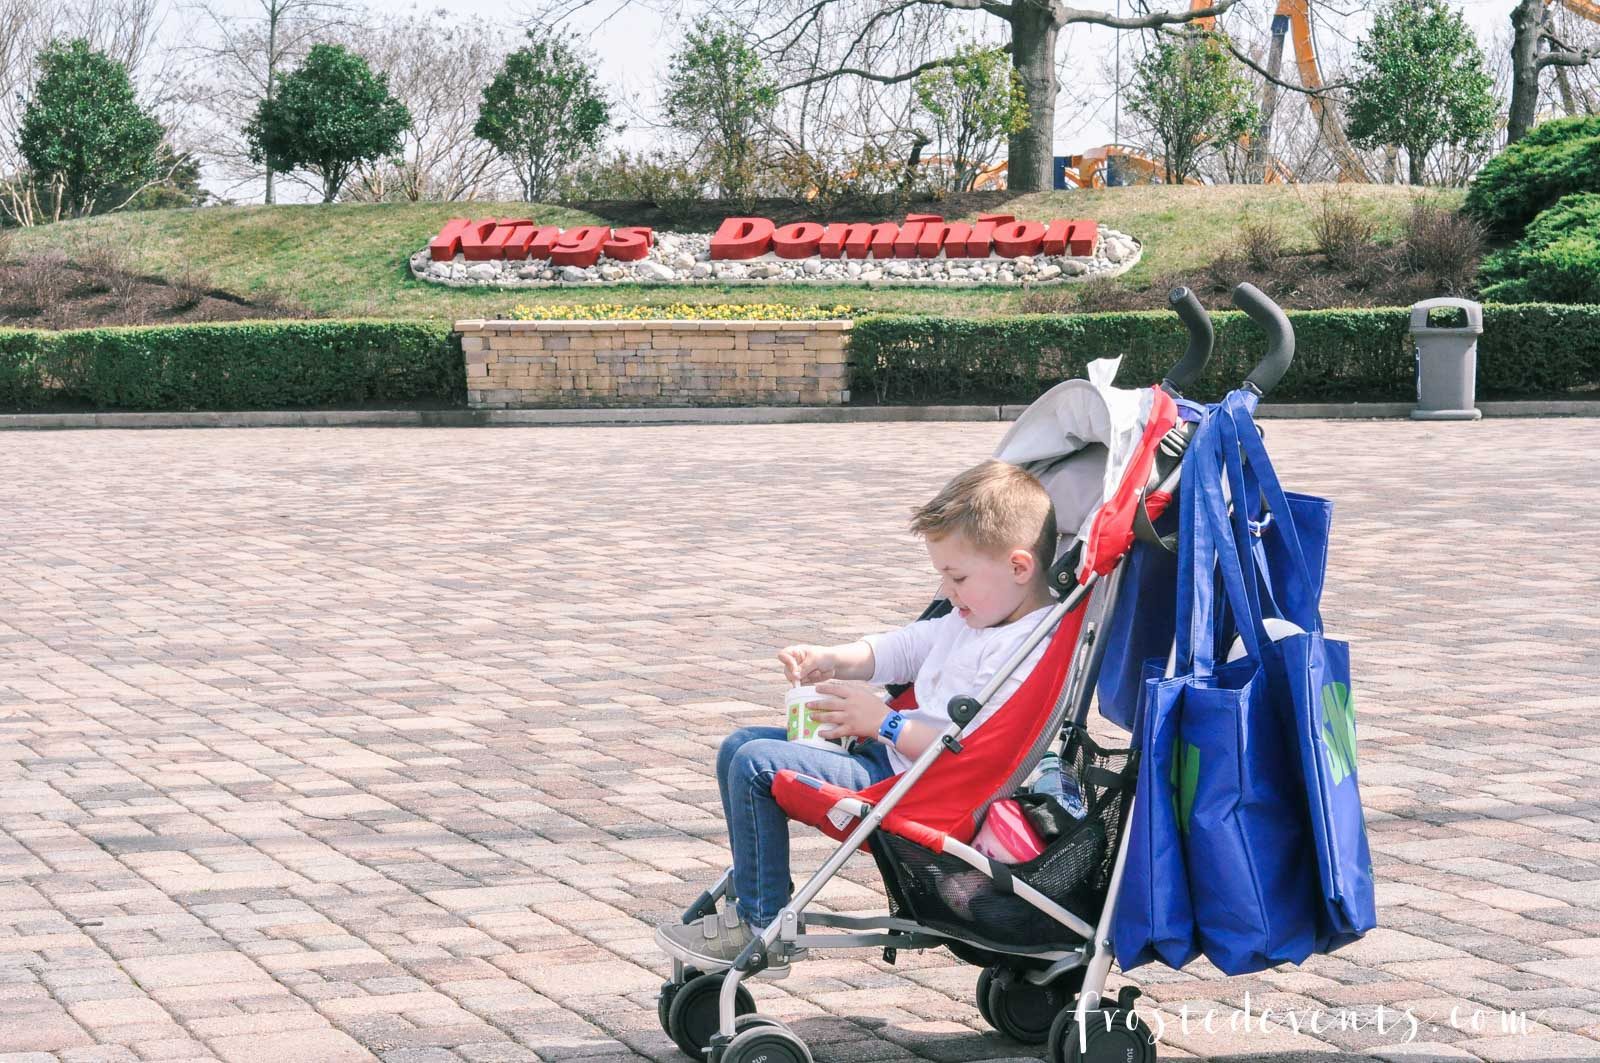 Kings Dominion Fun for the Whole Family- Best Theme Parks via Misty Nelson mom blogger family travel 